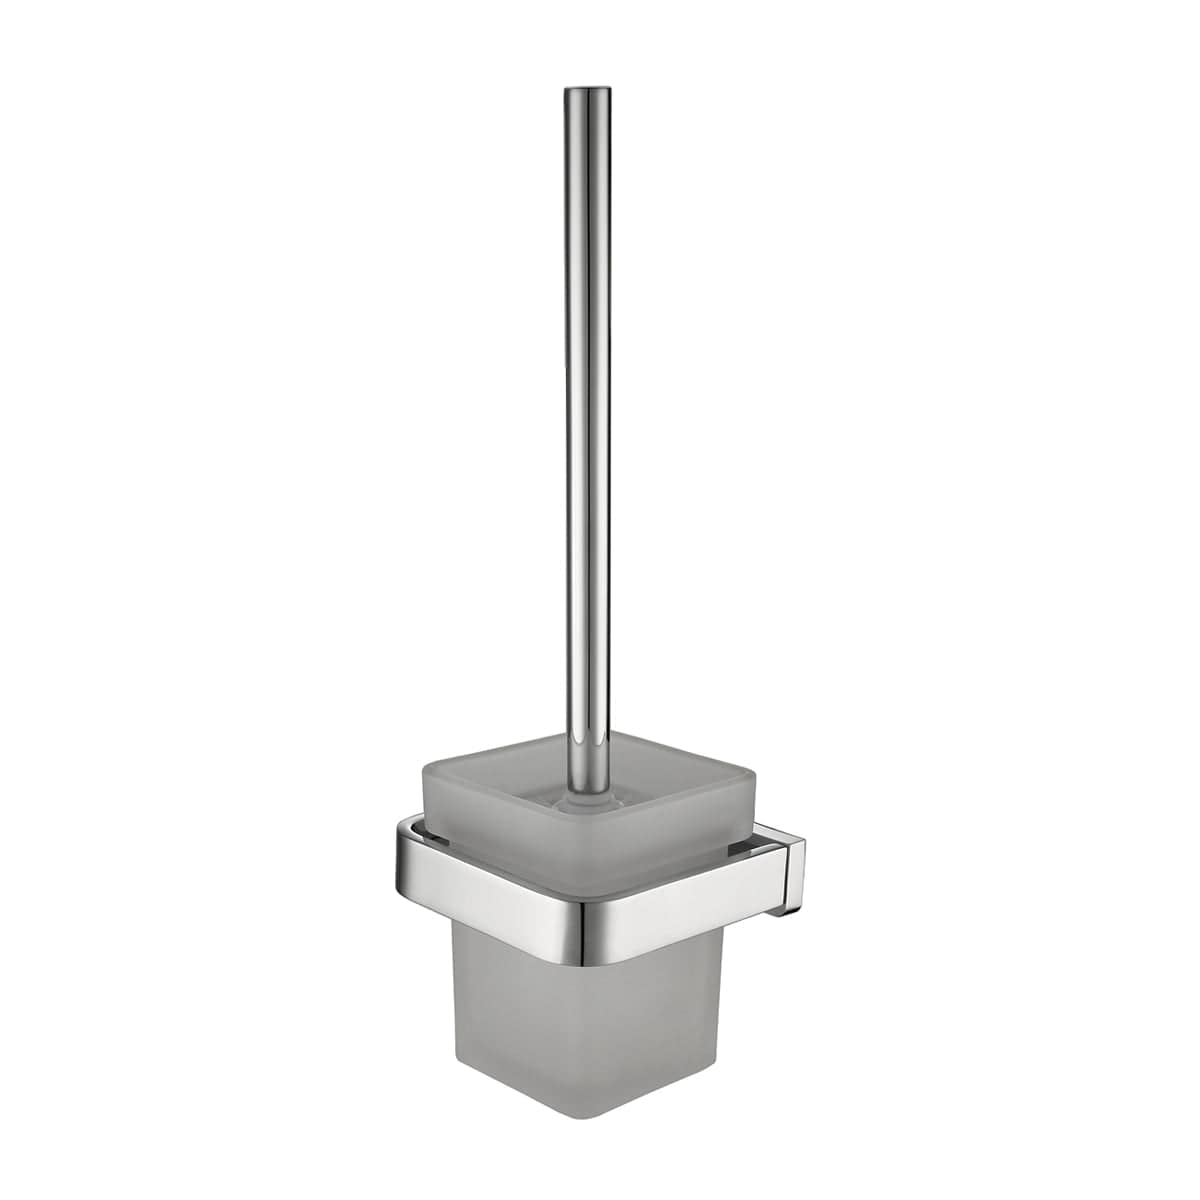 Shop Bathroom Brass Chrome Plated Toilet Paper Holder - GC5151 | Buy Online at Supply Master Accra, Ghana Bathroom Accessories Buy Tools hardware Building materials